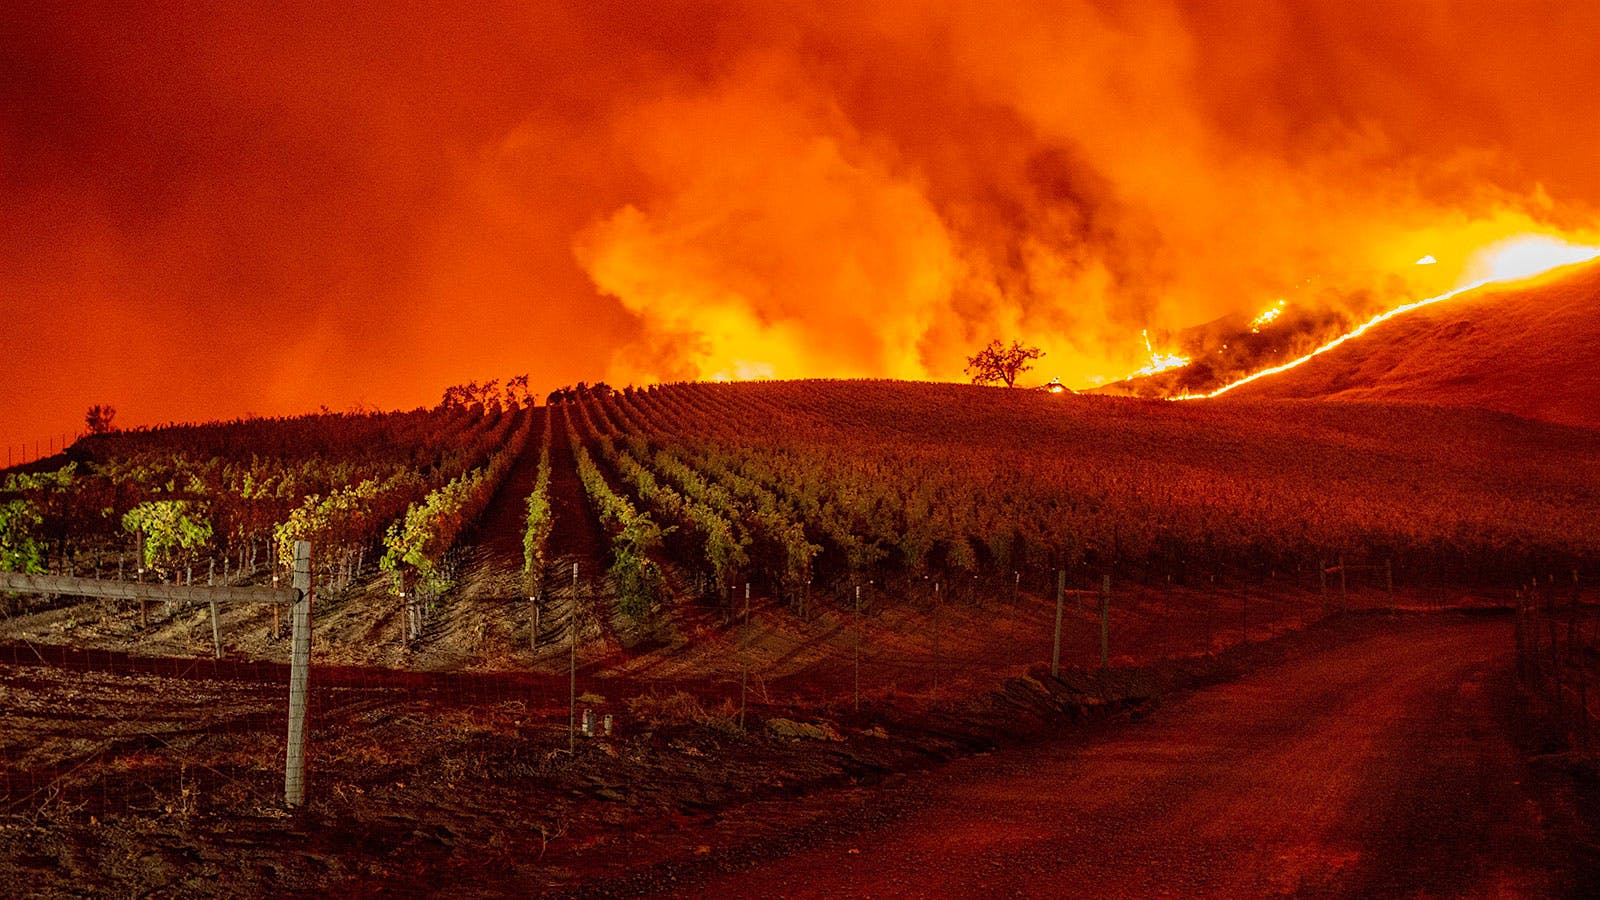 Wildfire Scorches More than 16,000 Acres in Sonoma Wine Country